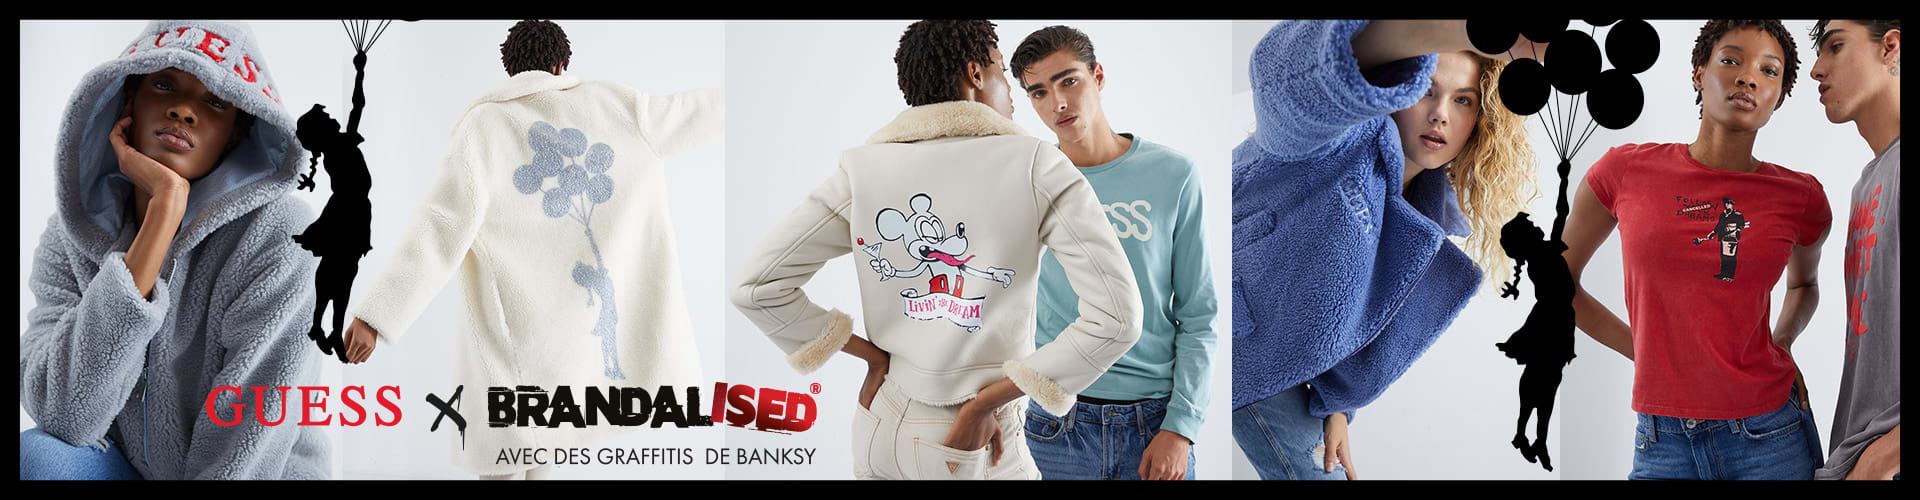 GUESS x BRANDALISED with graffiti by Banksy